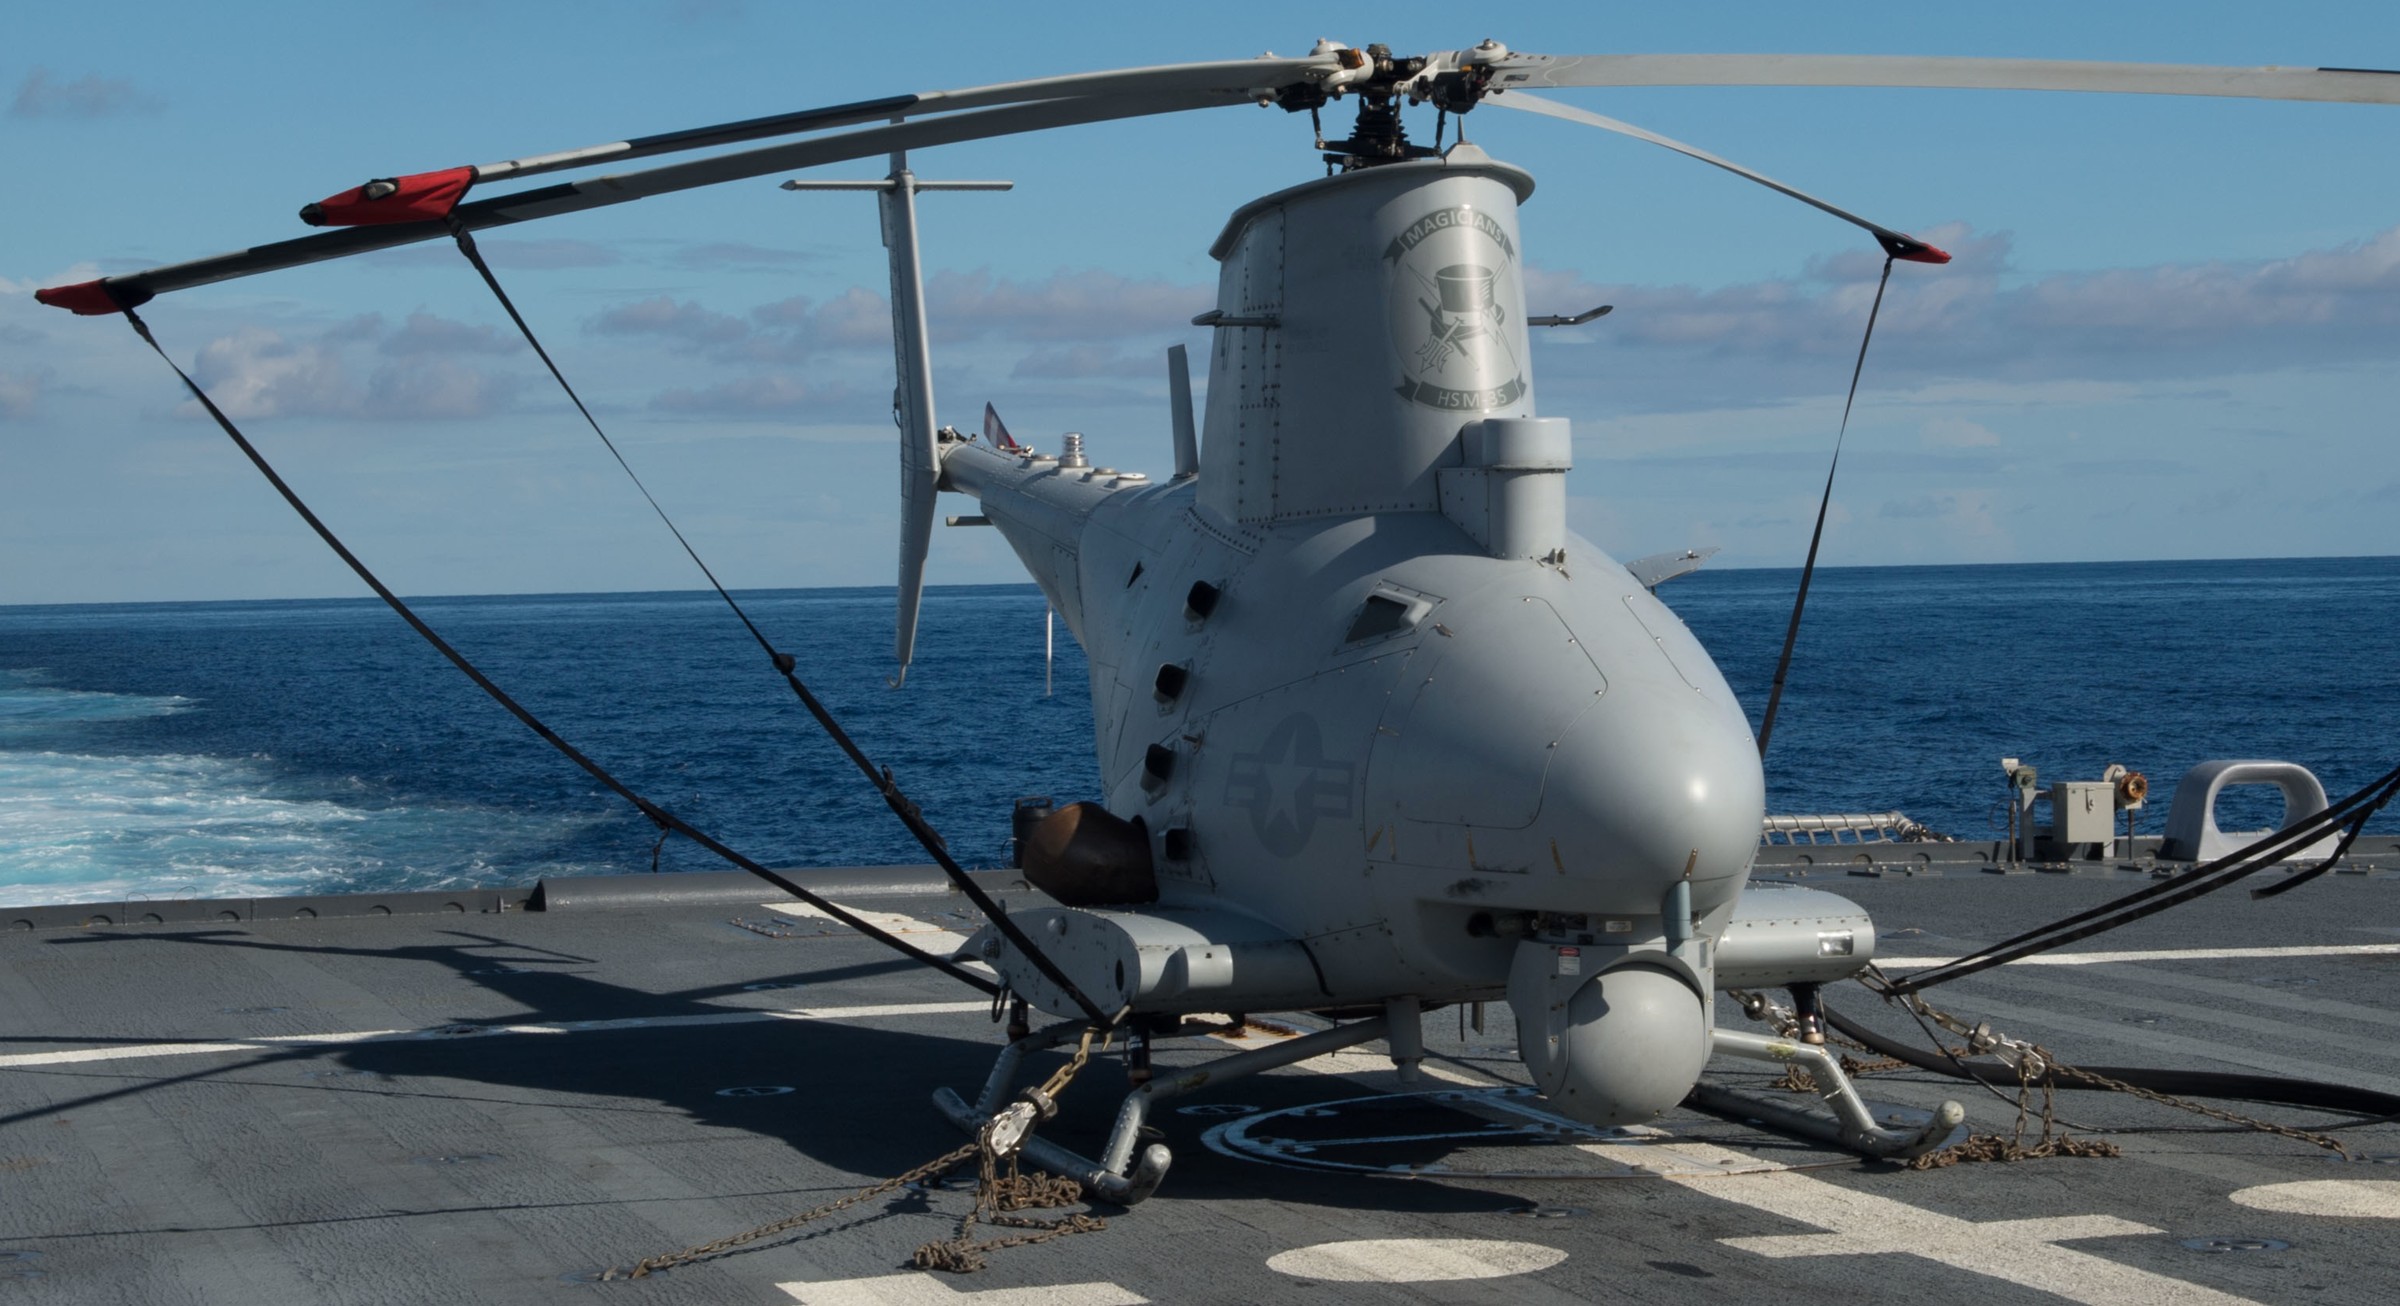 hsm-35 magicians helicopter maritime strike squadron us navy mq-8b fire scout uav lcs-3 uss fort worth 23